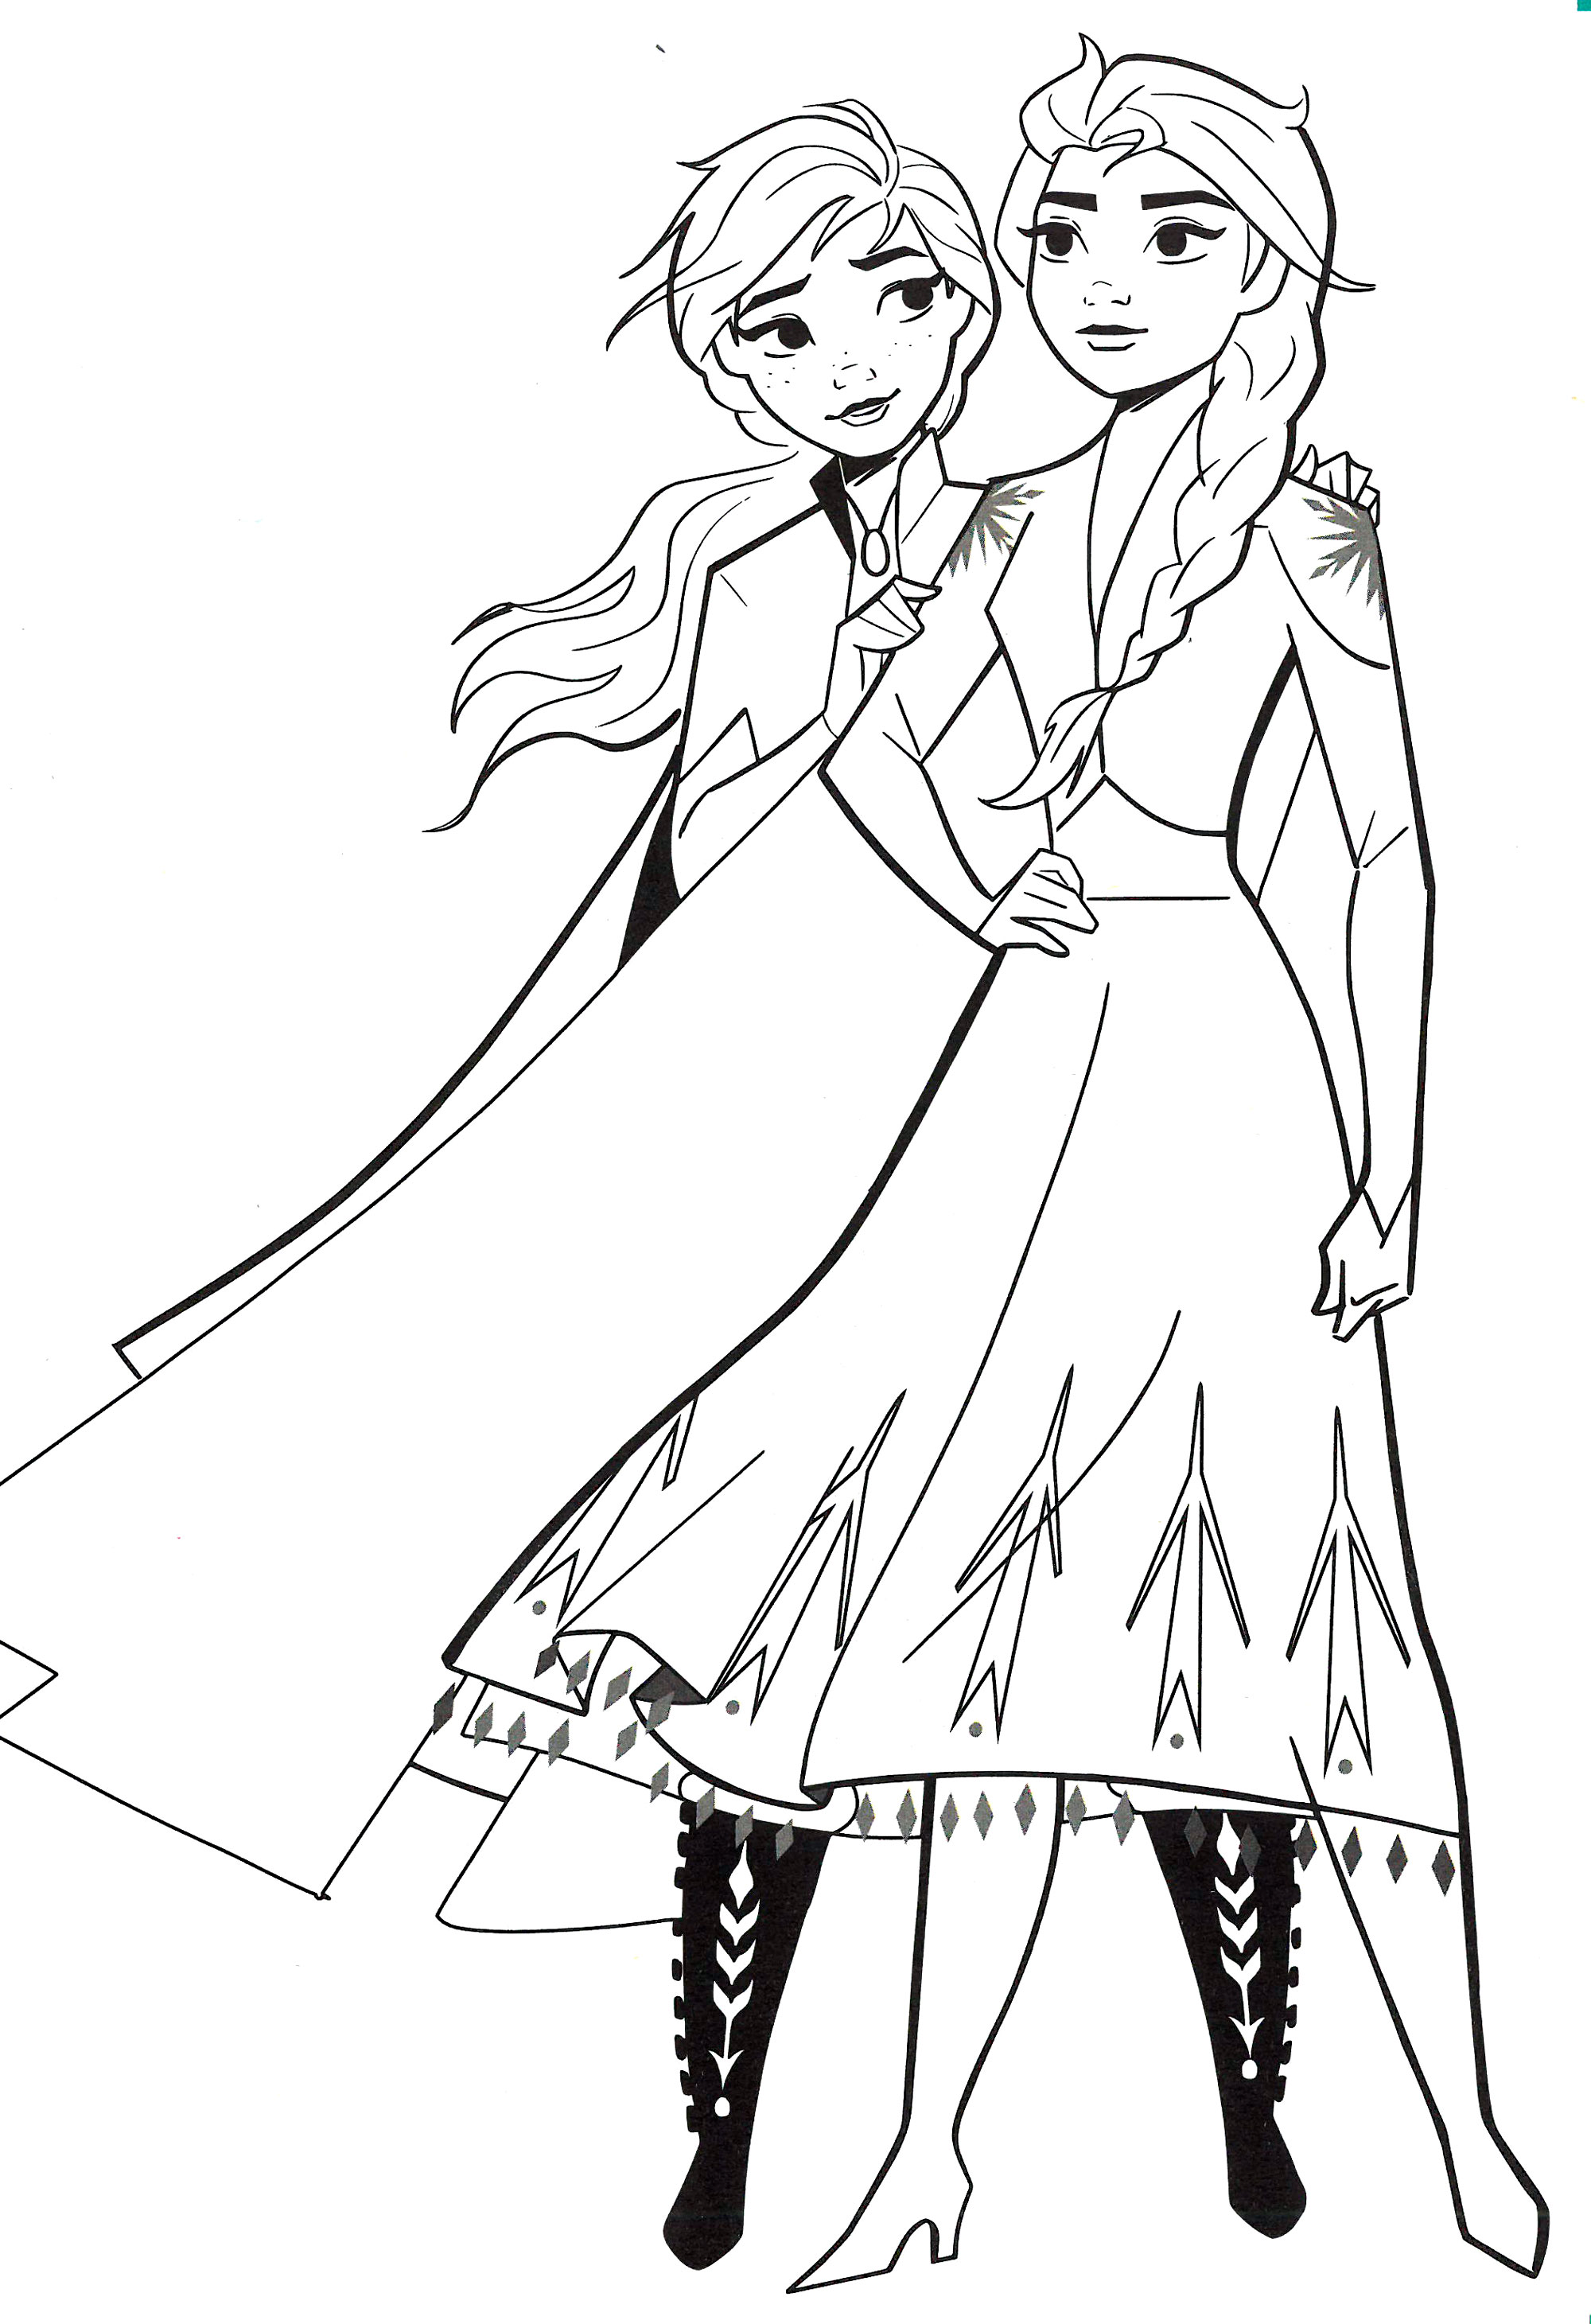 Elsa and her sister coloring page - free and printable